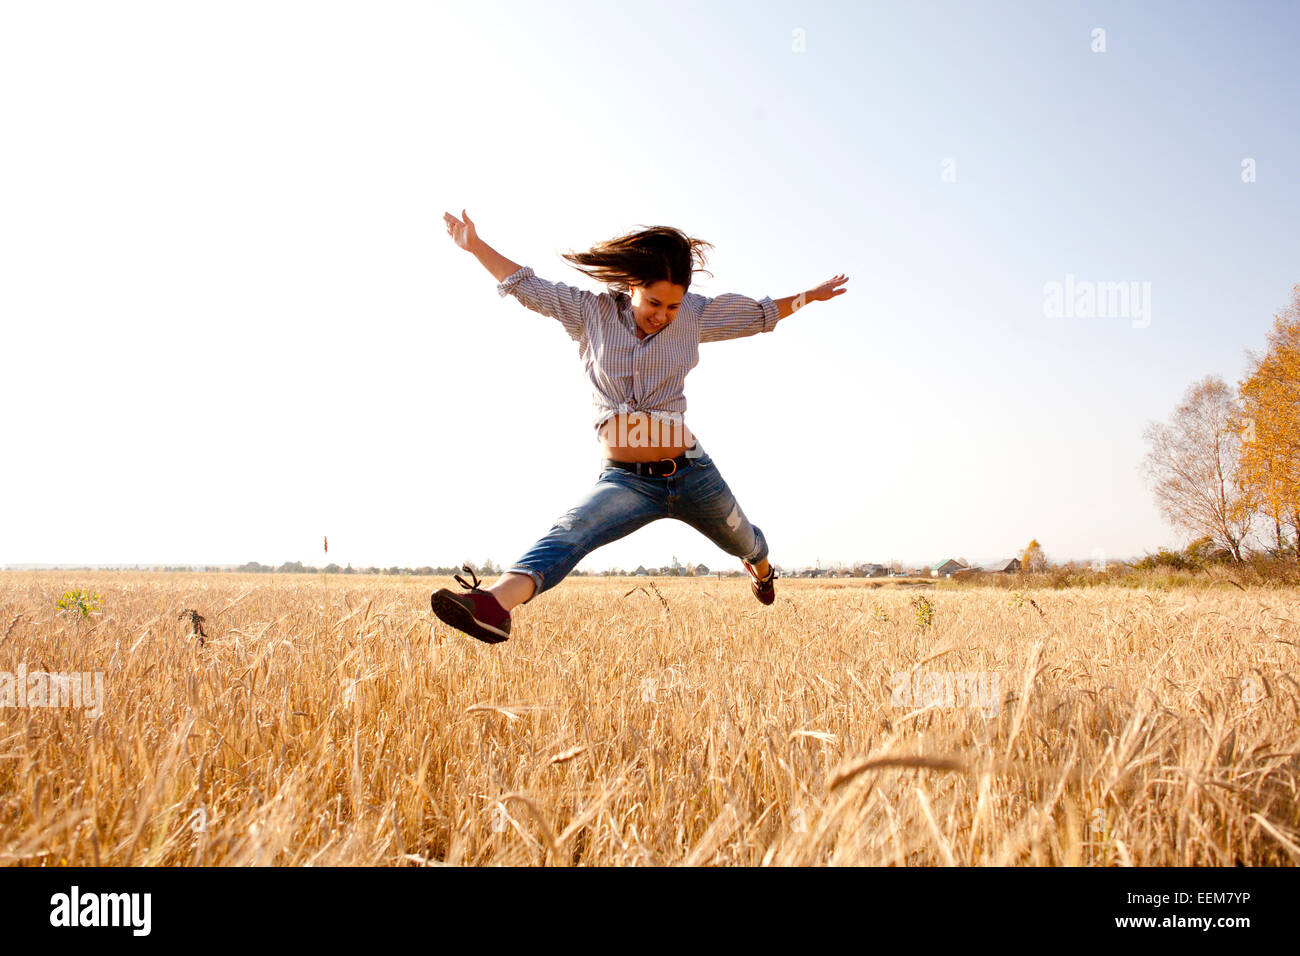 Caucasian woman jumping for joy in rural field Banque D'Images